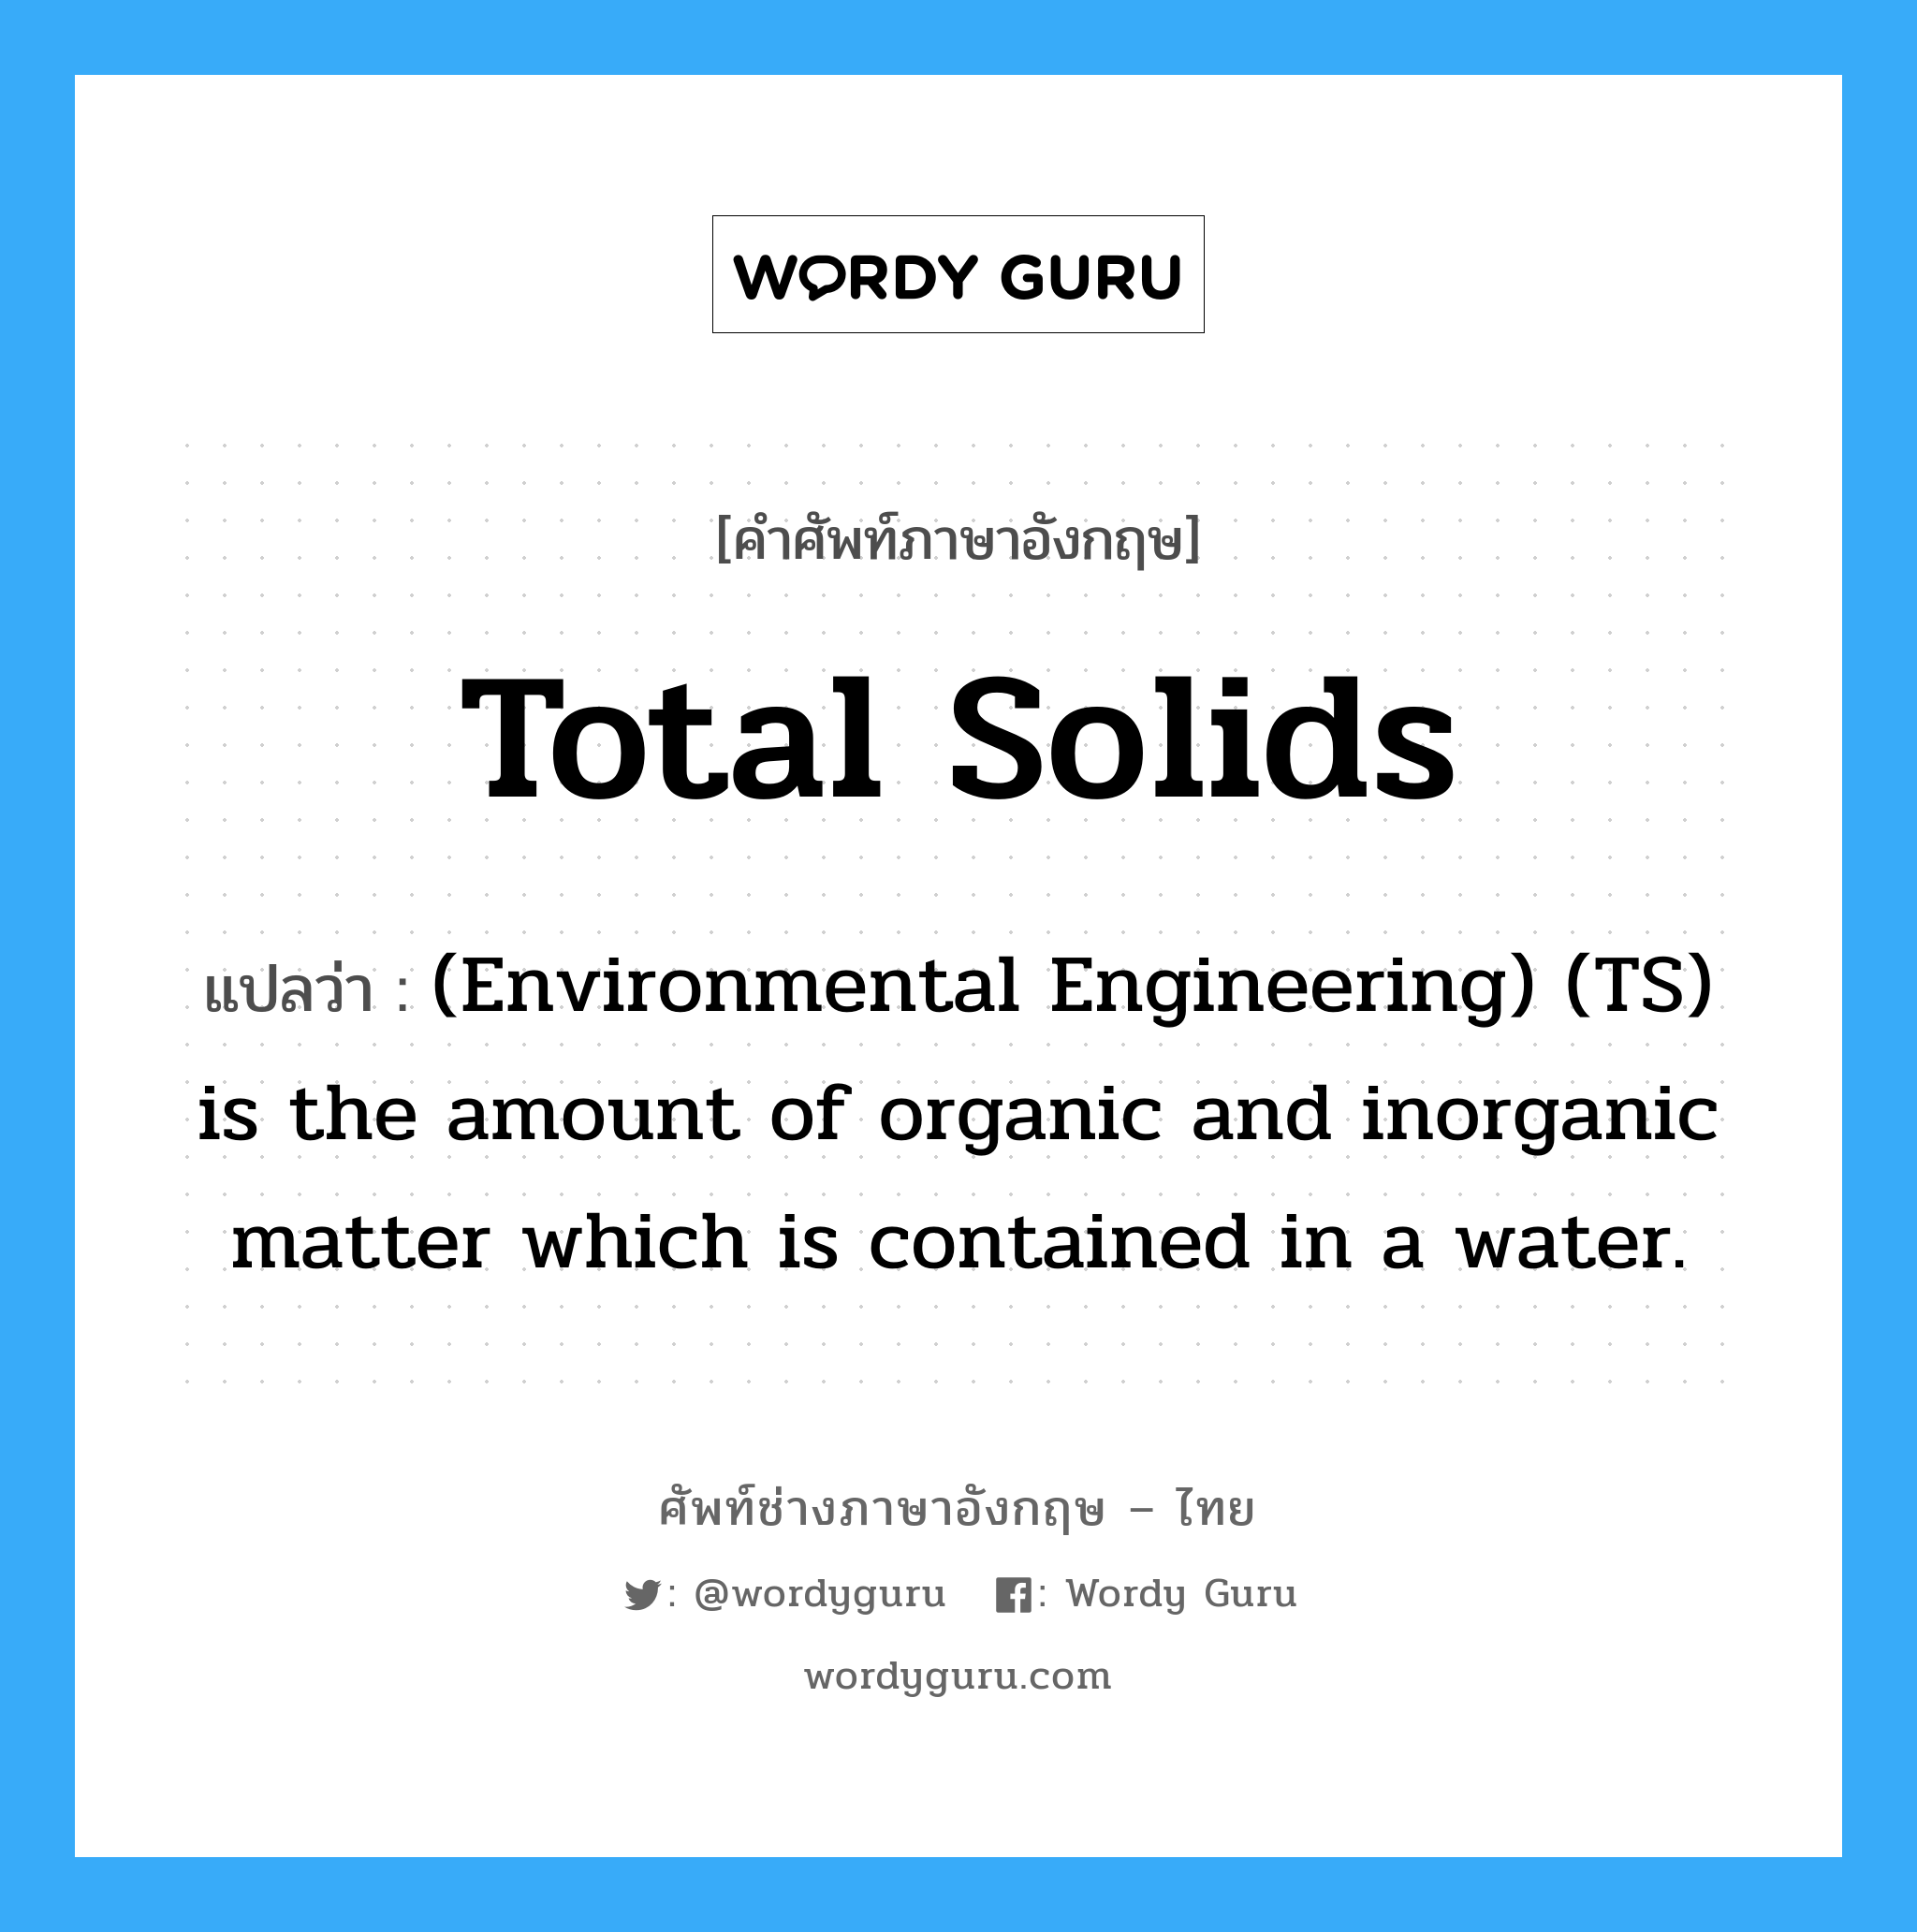 (Environmental Engineering) (TS) is the amount of organic and inorganic matter which is contained in a water. ภาษาอังกฤษ?, คำศัพท์ช่างภาษาอังกฤษ - ไทย (Environmental Engineering) (TS) is the amount of organic and inorganic matter which is contained in a water. คำศัพท์ภาษาอังกฤษ (Environmental Engineering) (TS) is the amount of organic and inorganic matter which is contained in a water. แปลว่า Total solids